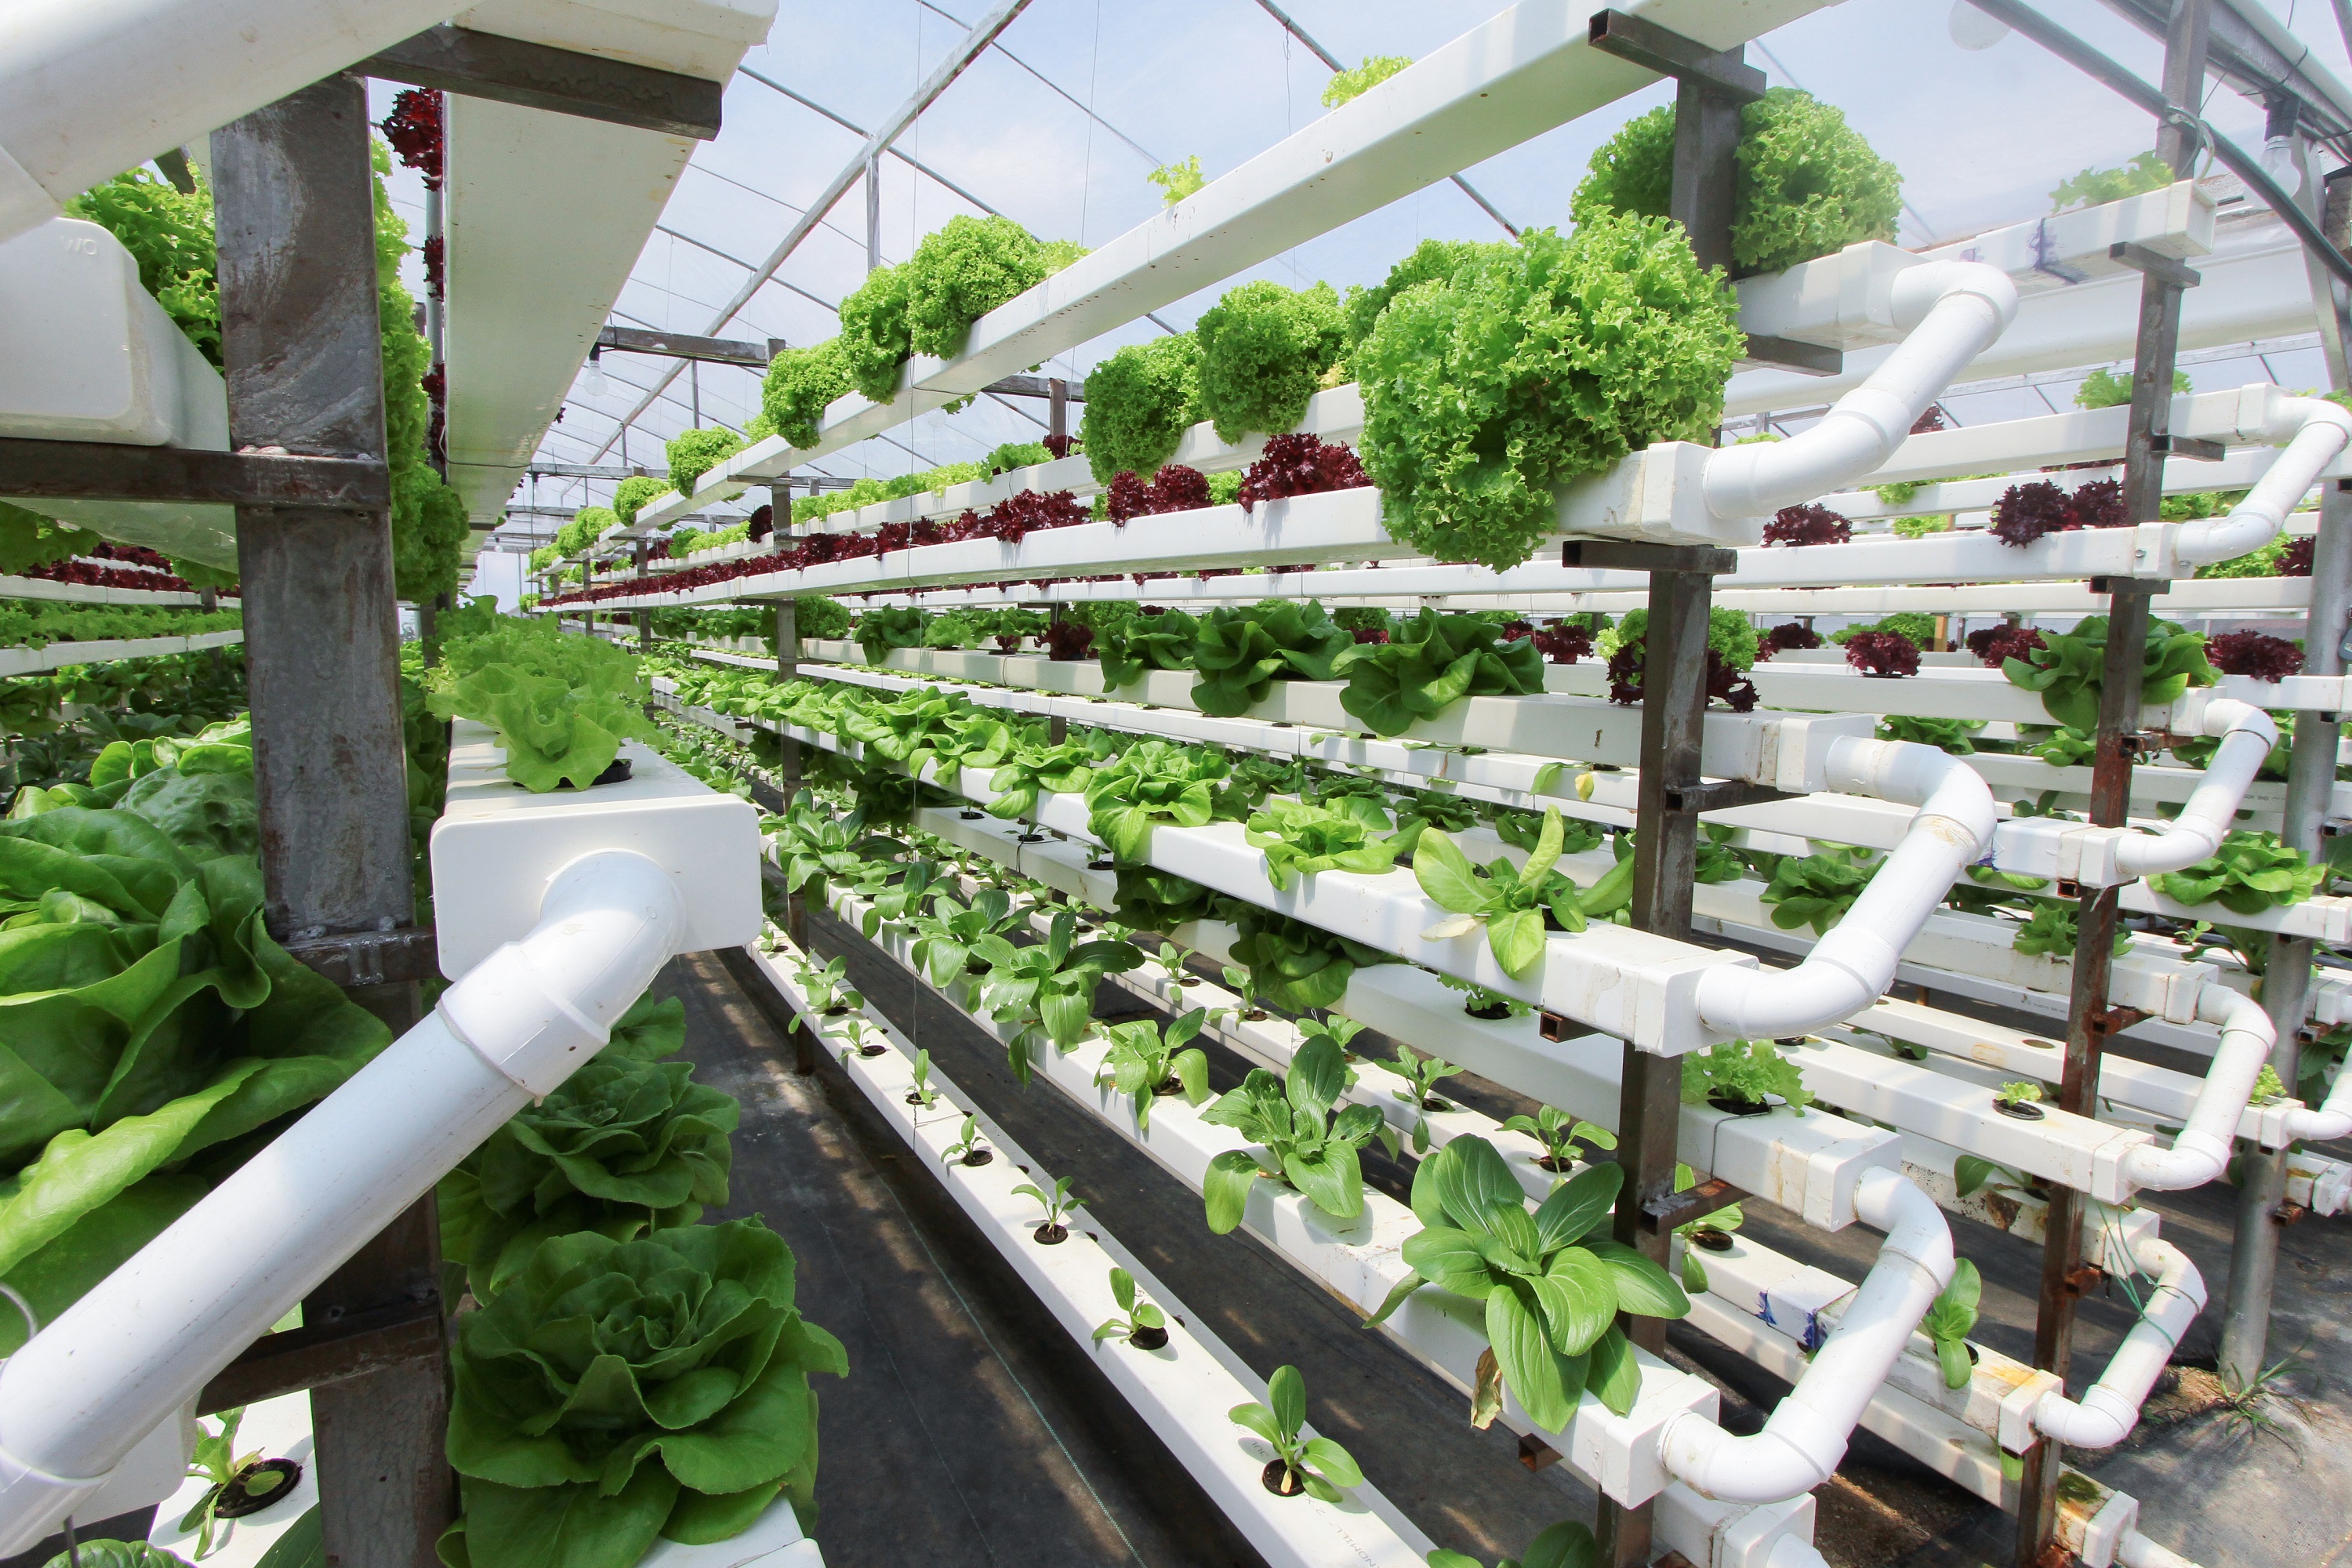 Aquaponics system of white pipes supplying water to aquaponic farm or greens